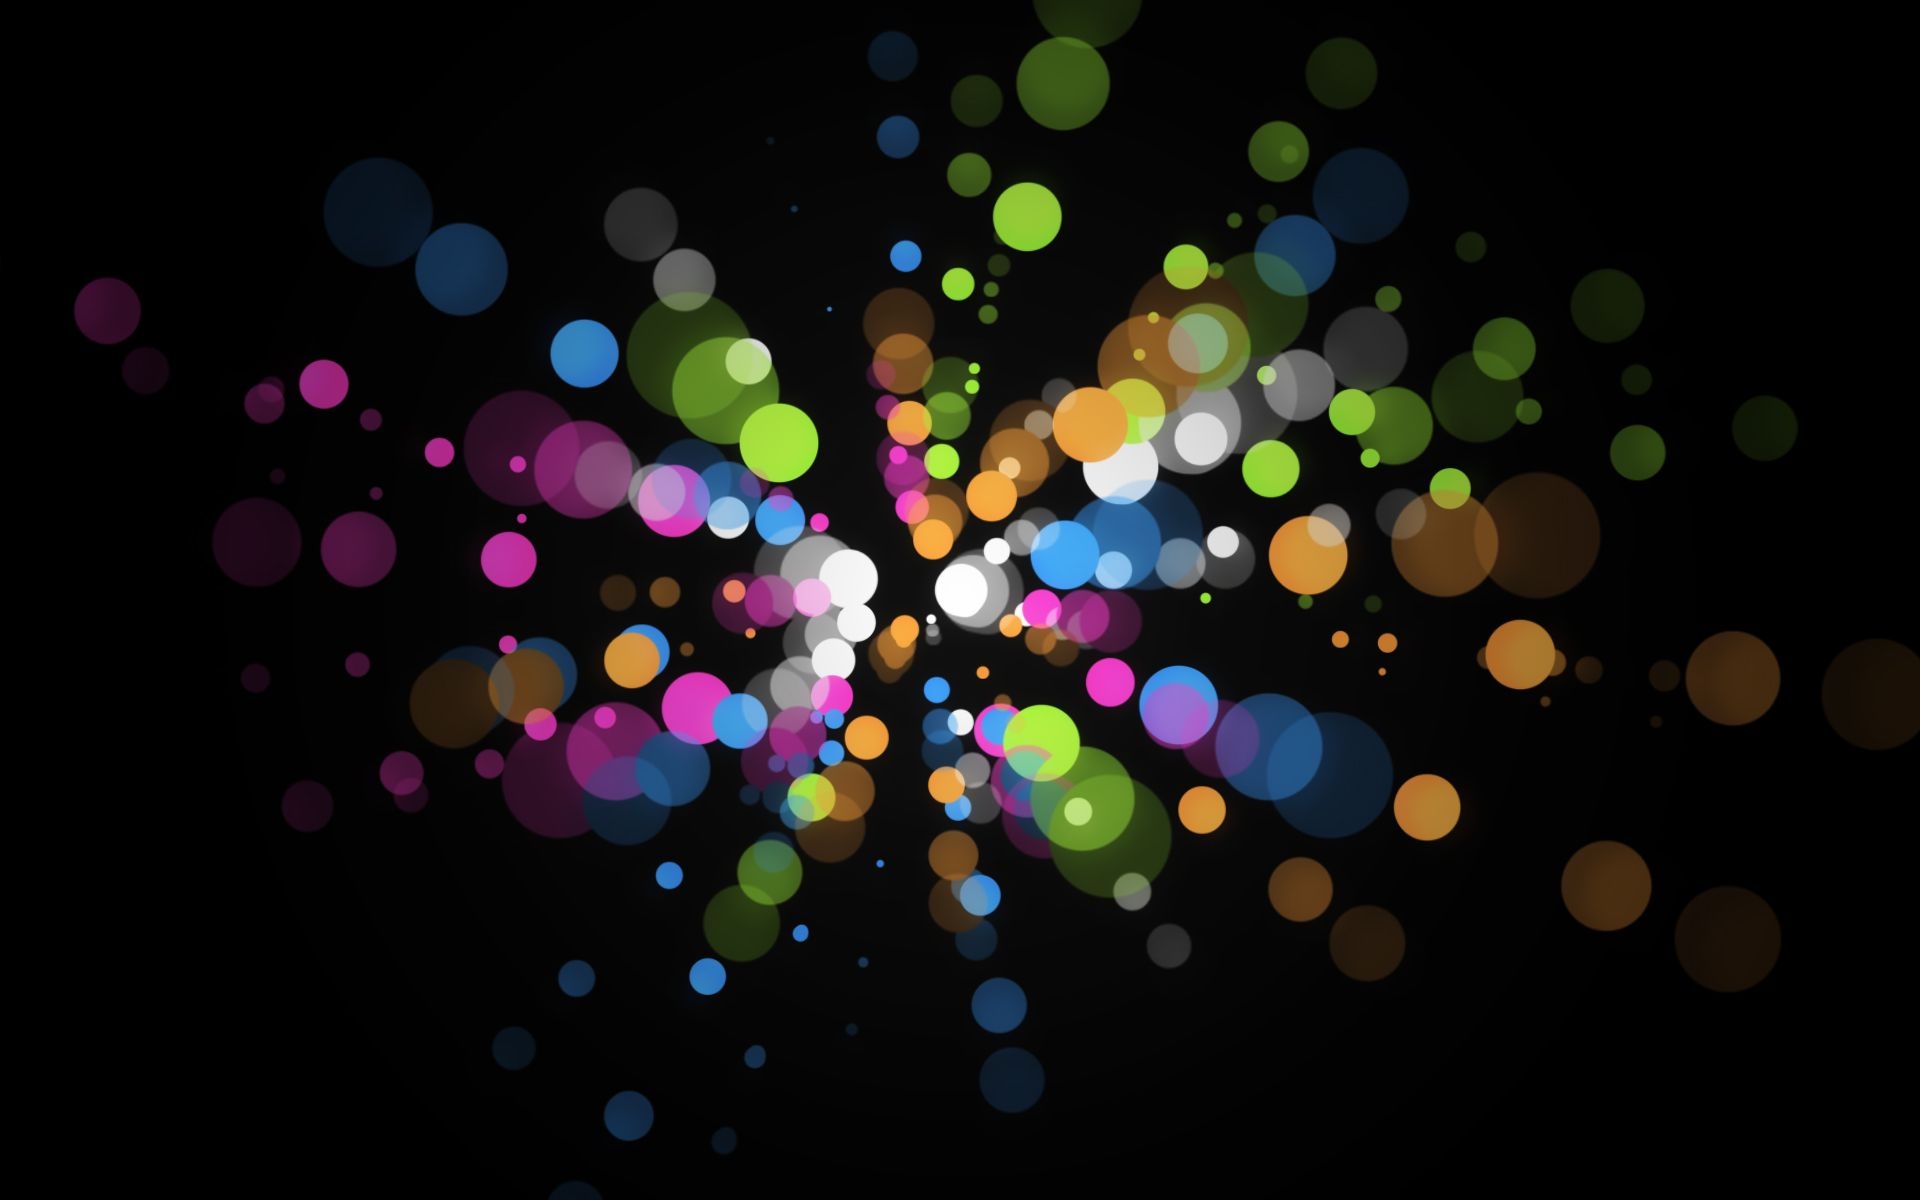 Free photo Wallpaper with colored abstract circles on a black background